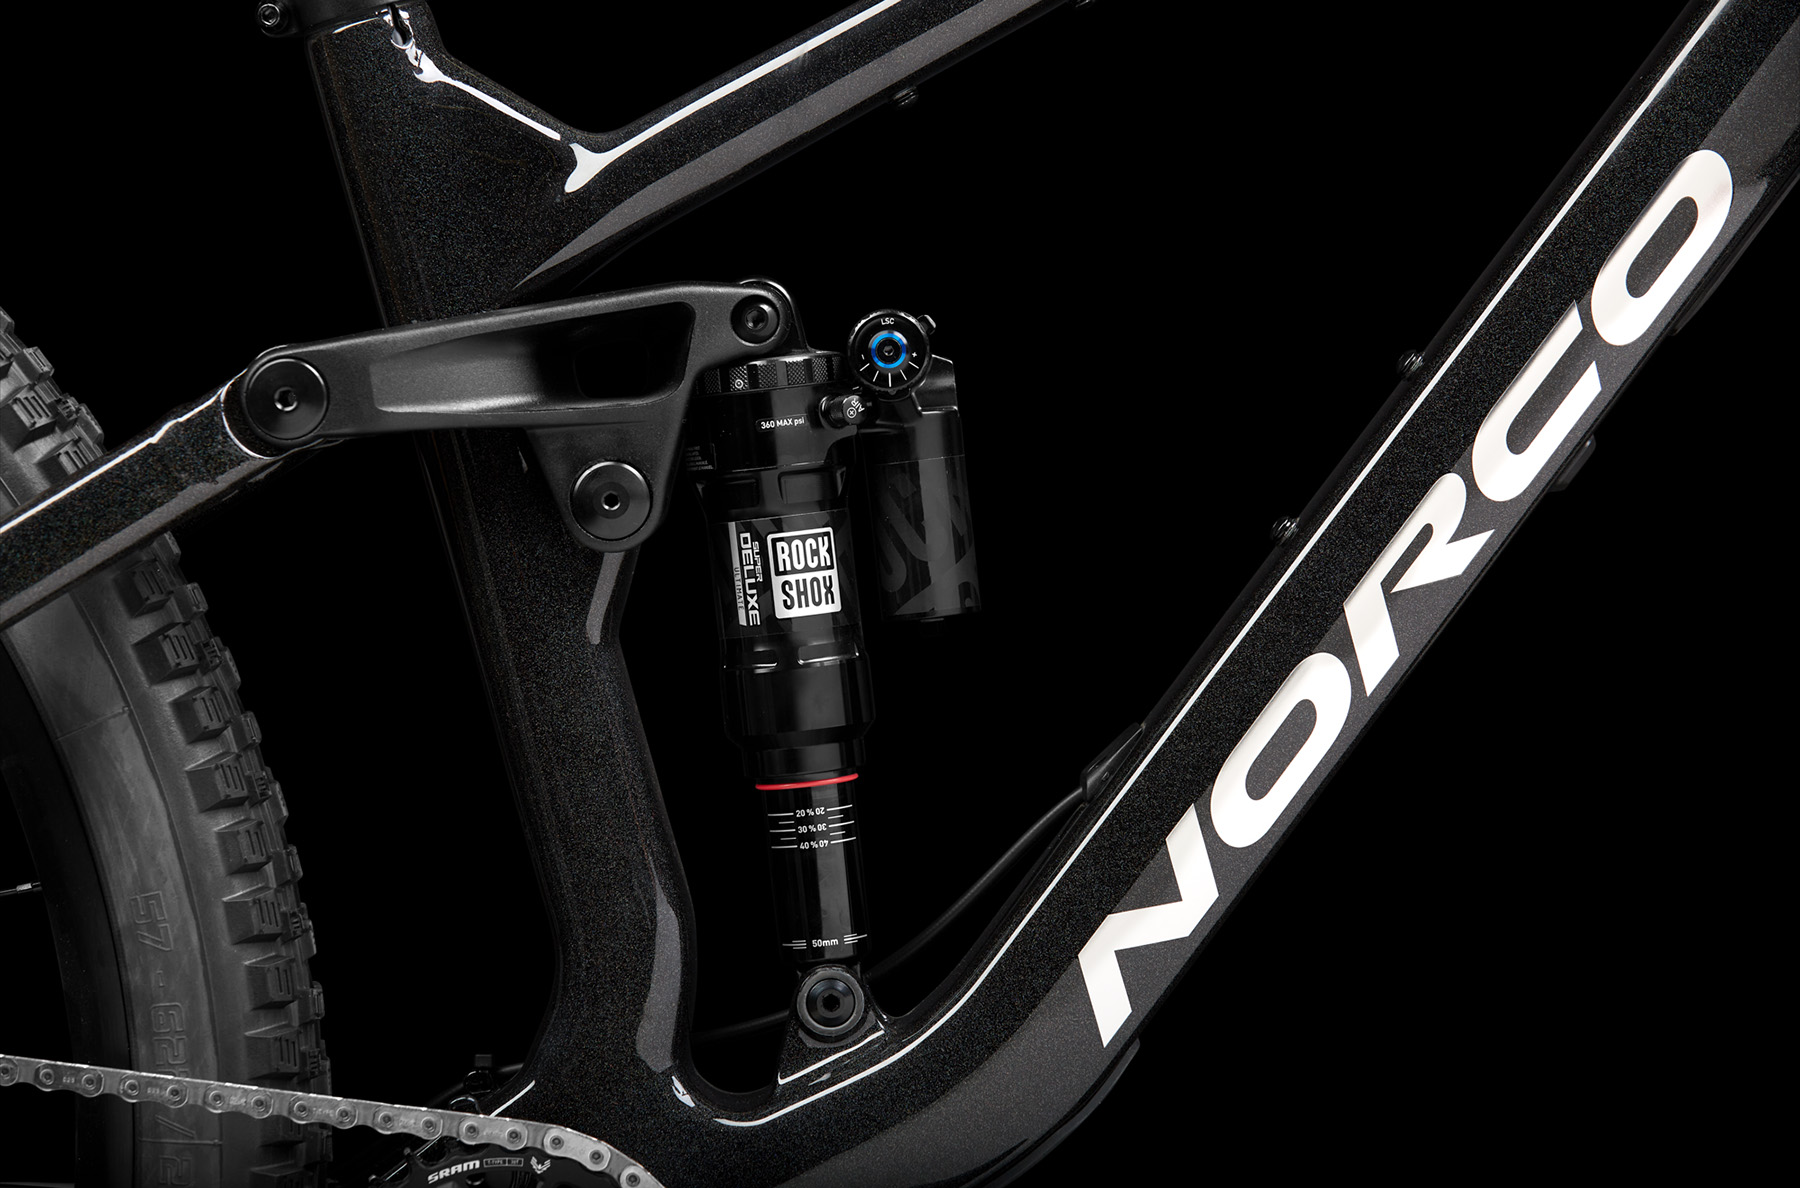 Dylan Wood reviews the Norco Fluid FS Carbon for Blister